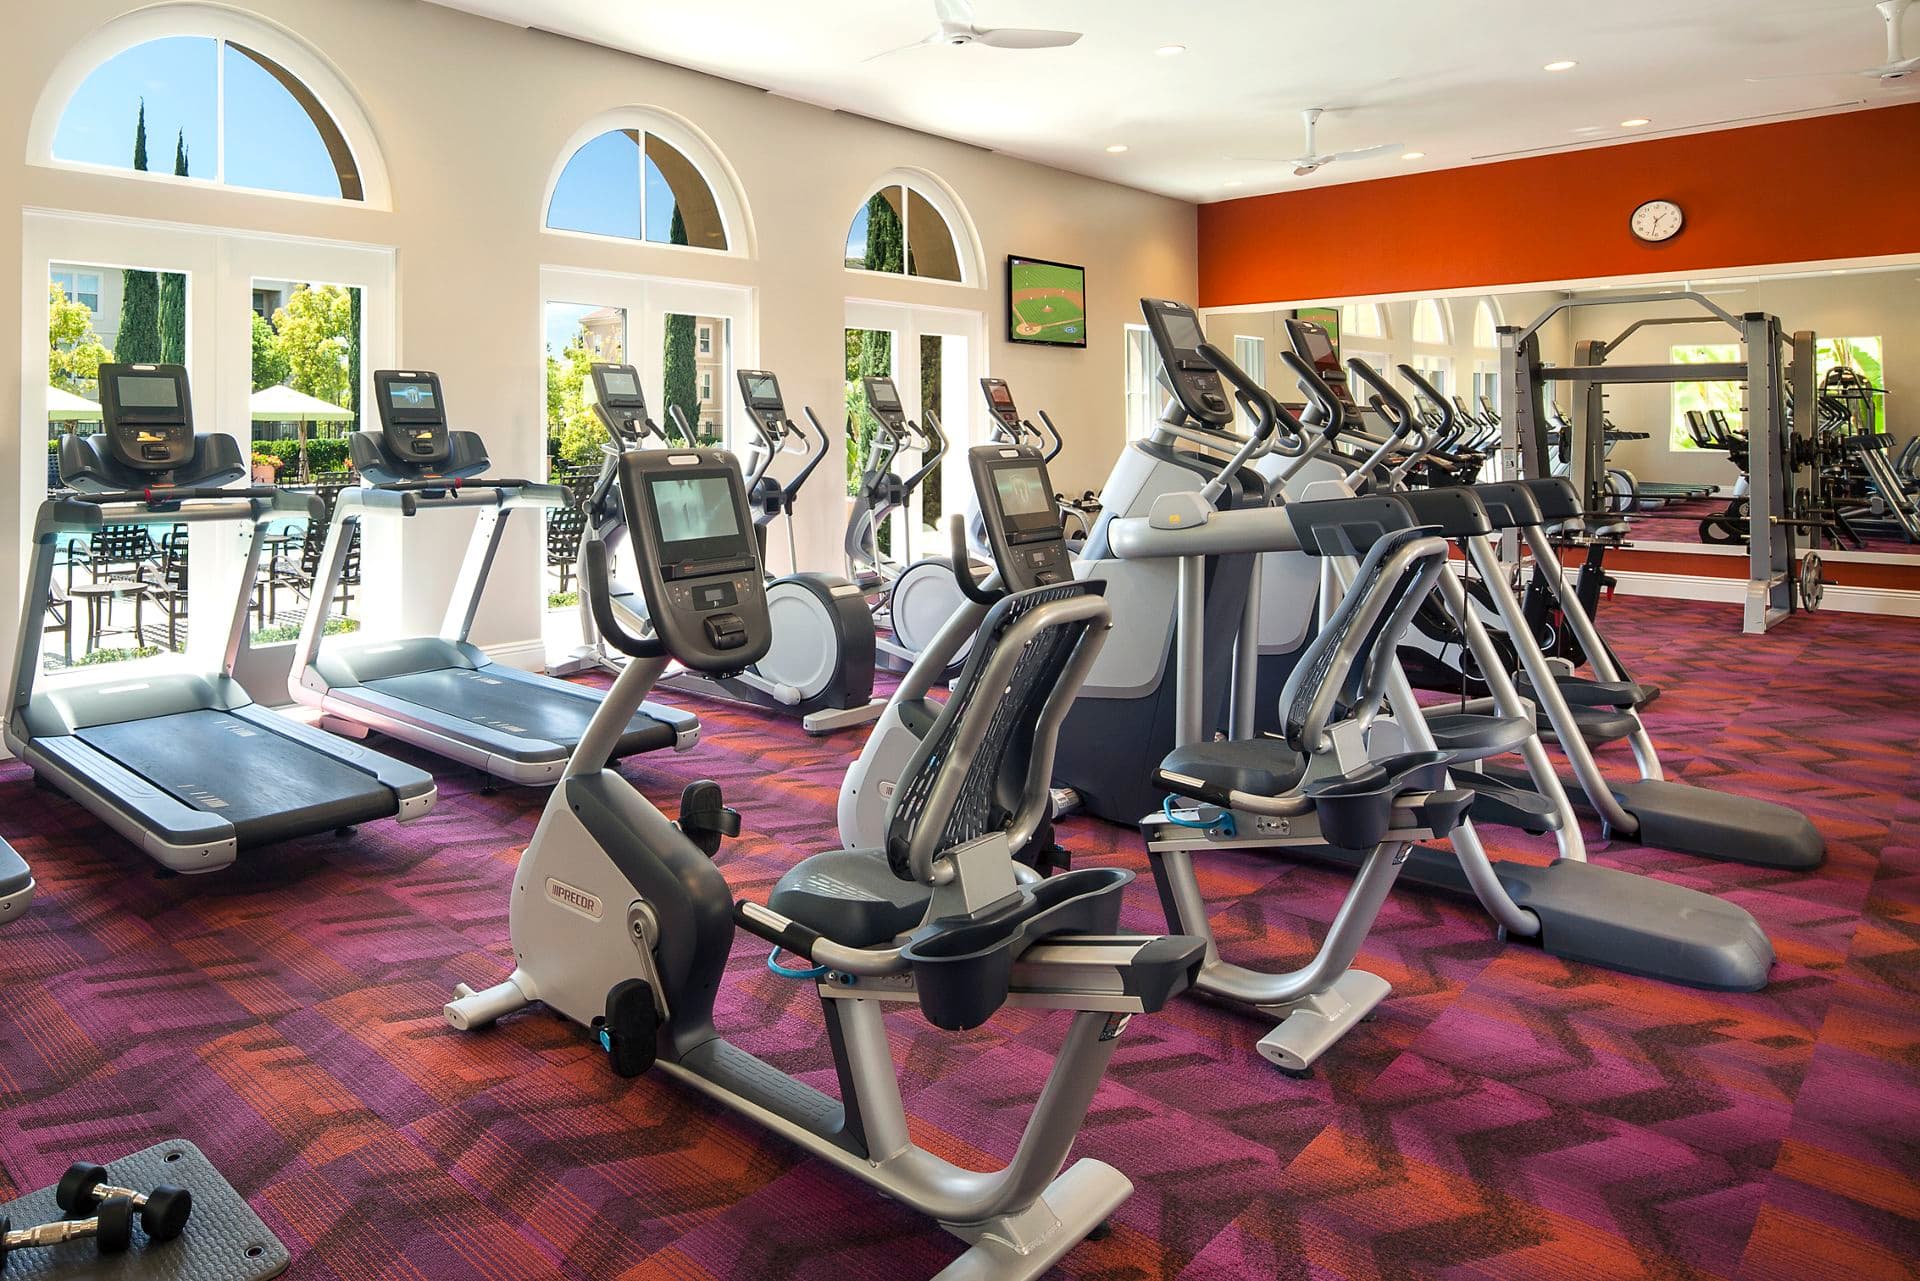 Interior view of fitness center at Umbria Apartment Homes at Cypress Village in Irvine, CA.